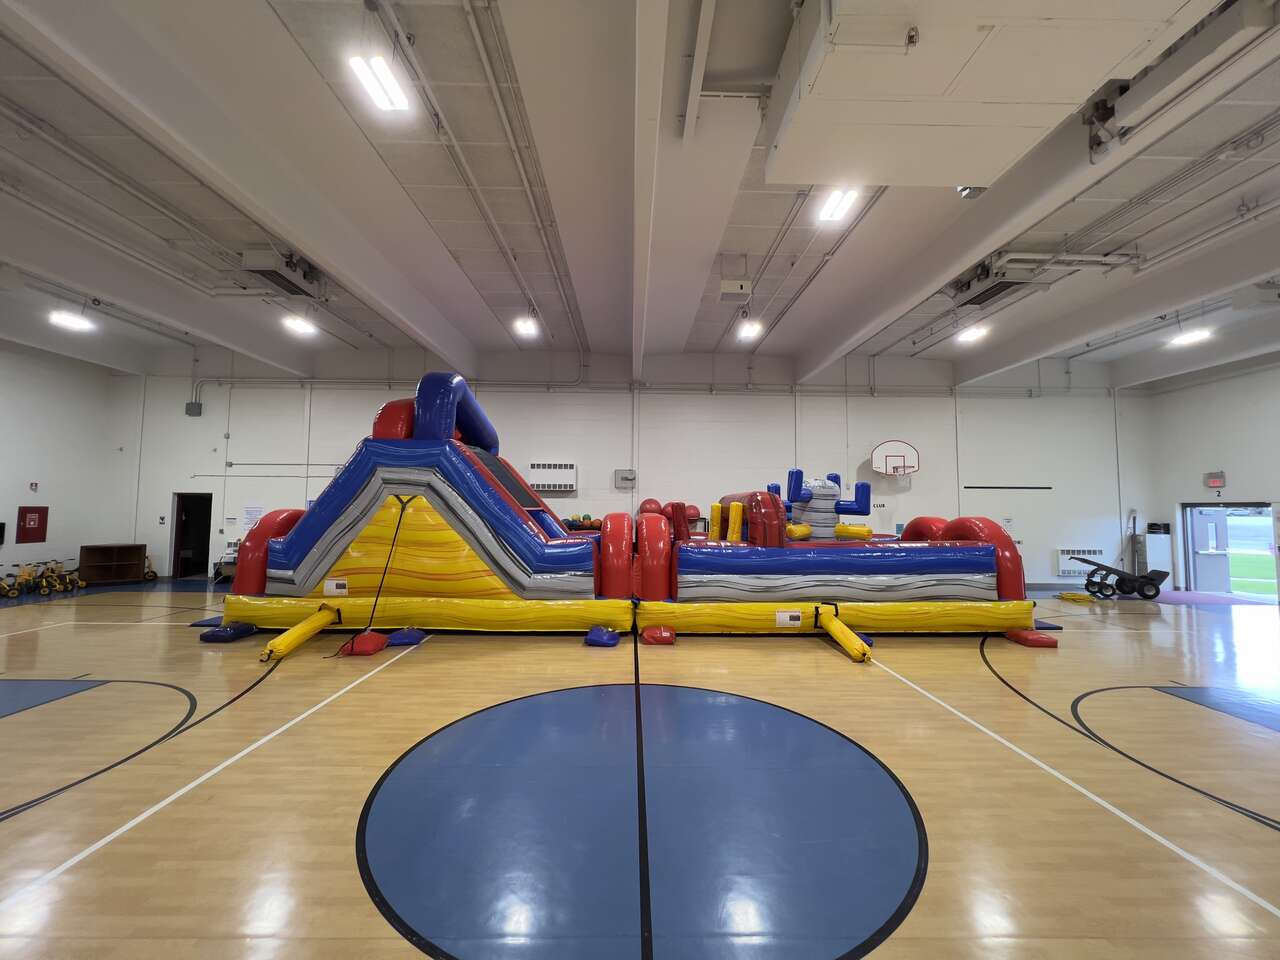 obstacles courses, from Fun Bounces Rental in New Lenox, IL 60432